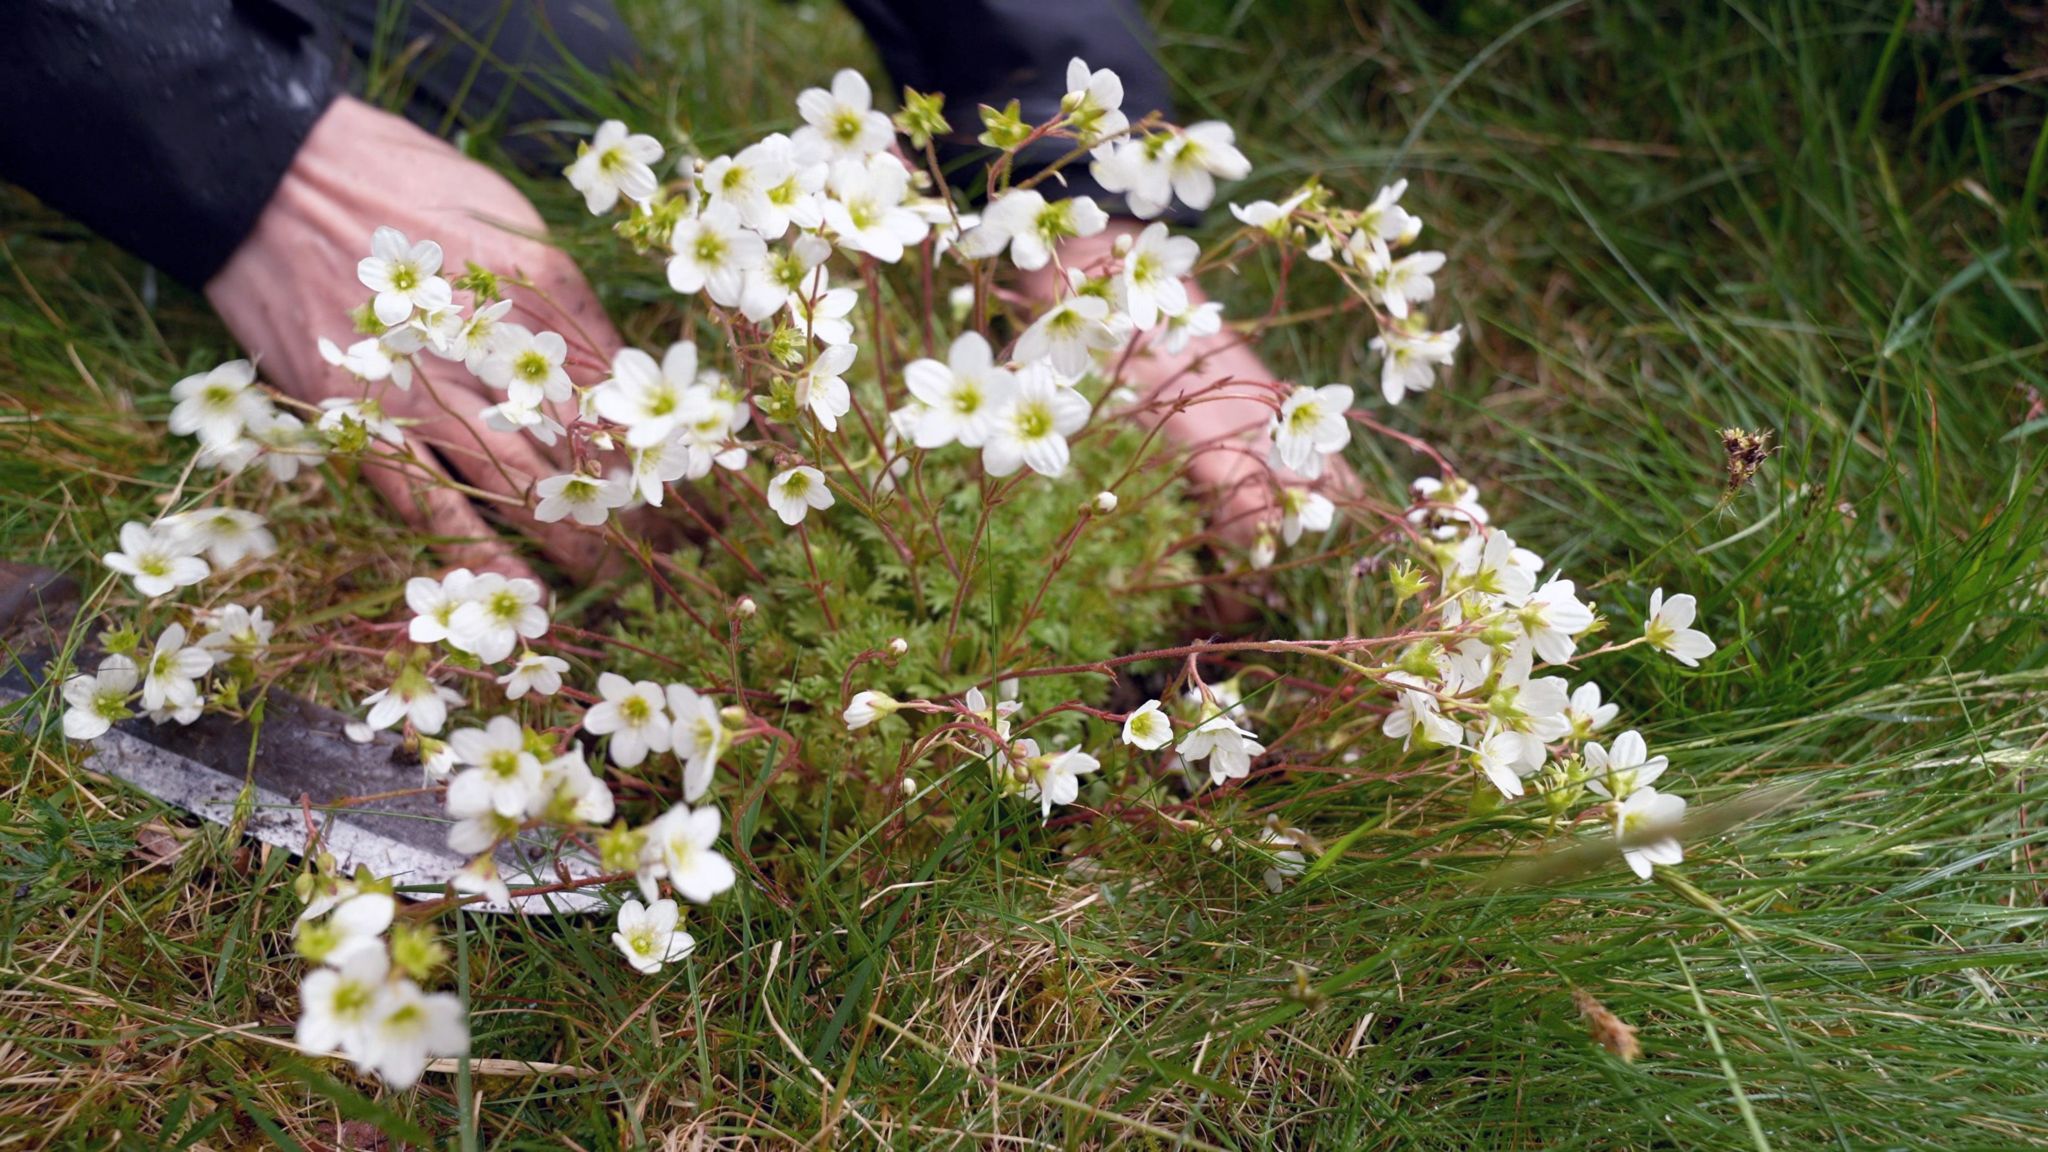 A plant with white flowers planted in soil